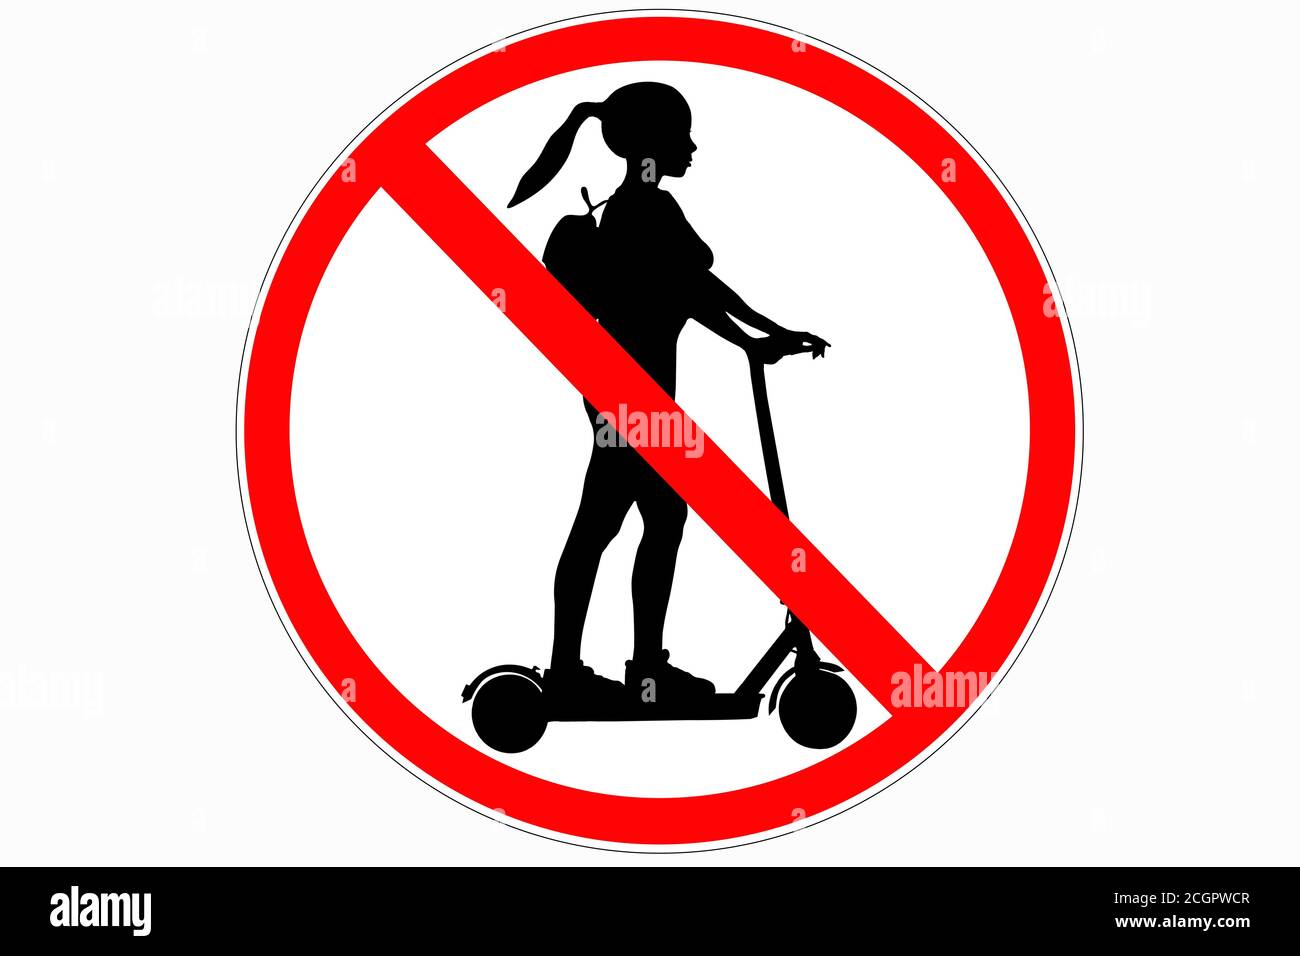 Road sign forbidding electric scooter. Image of a woman on electric scooter with a backpack. red road sign. Illustration of not allowed electric scoot Stock Photo